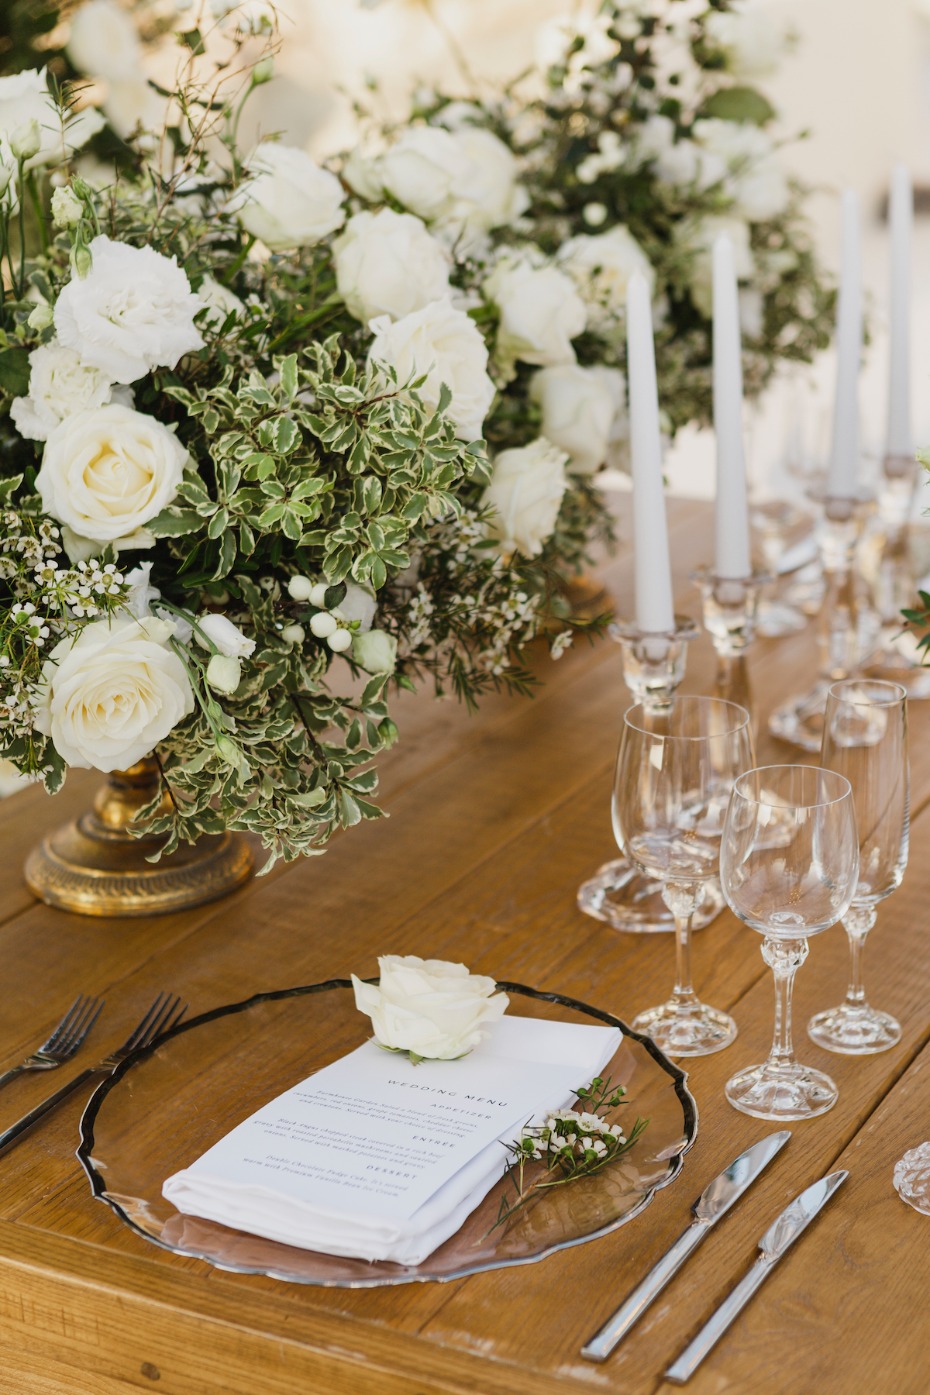 Meet the Luxury Planning Group Behind This Stunning Grecian Wedding Look